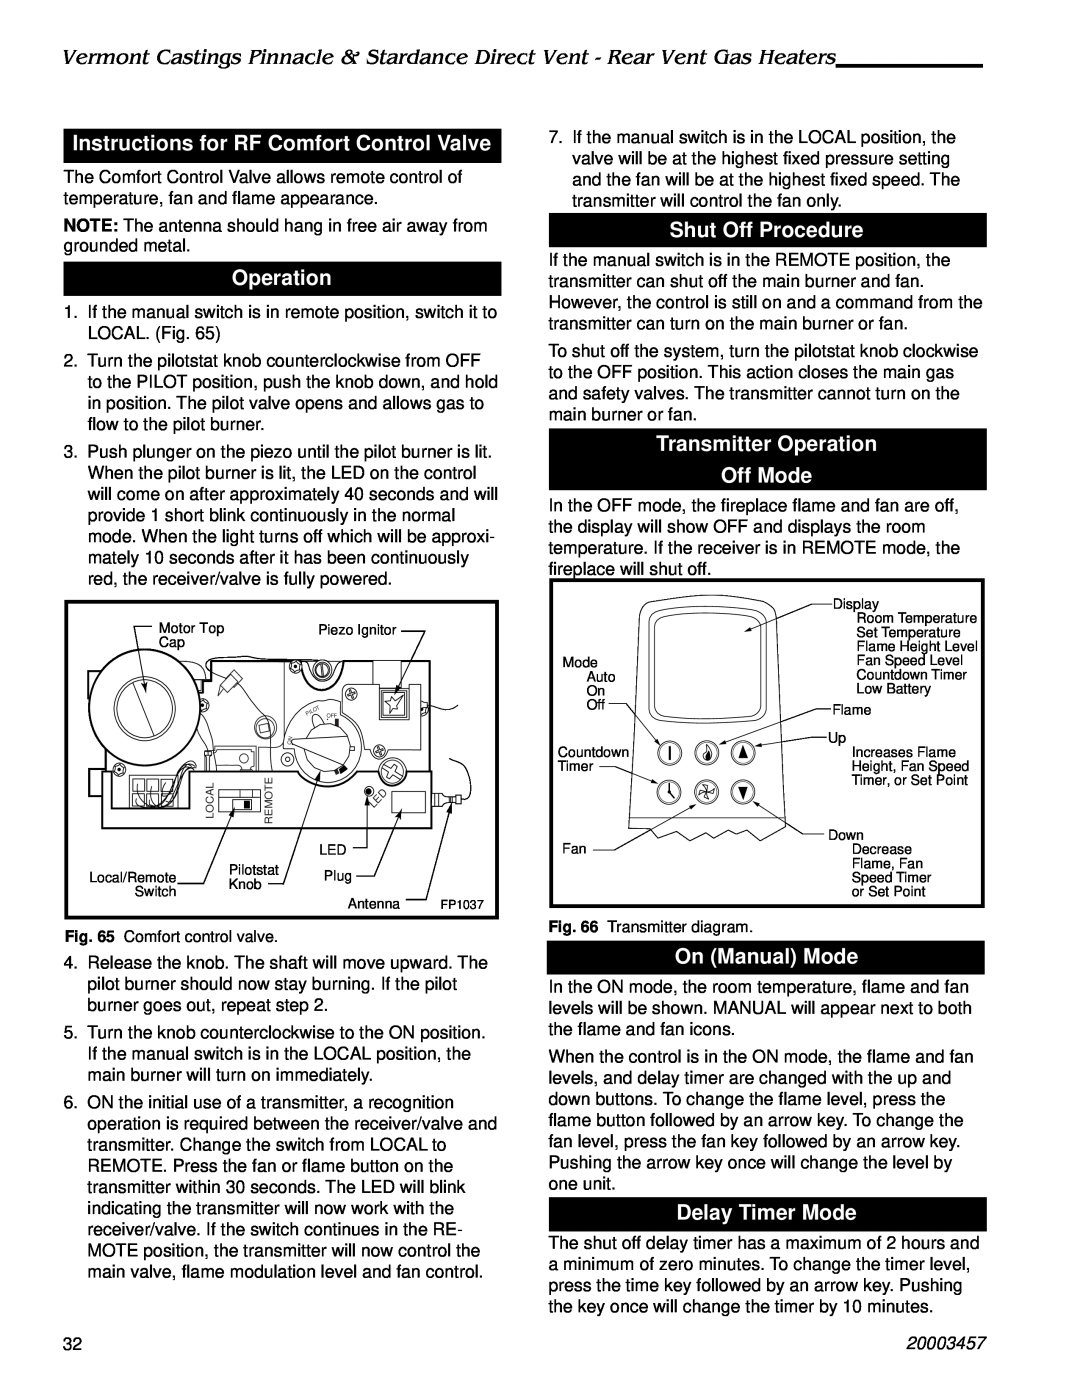 Vermont Casting 2998 Instructions for RF Comfort Control Valve, Operation, Shut Off Procedure, On Manual Mode, 20003457 